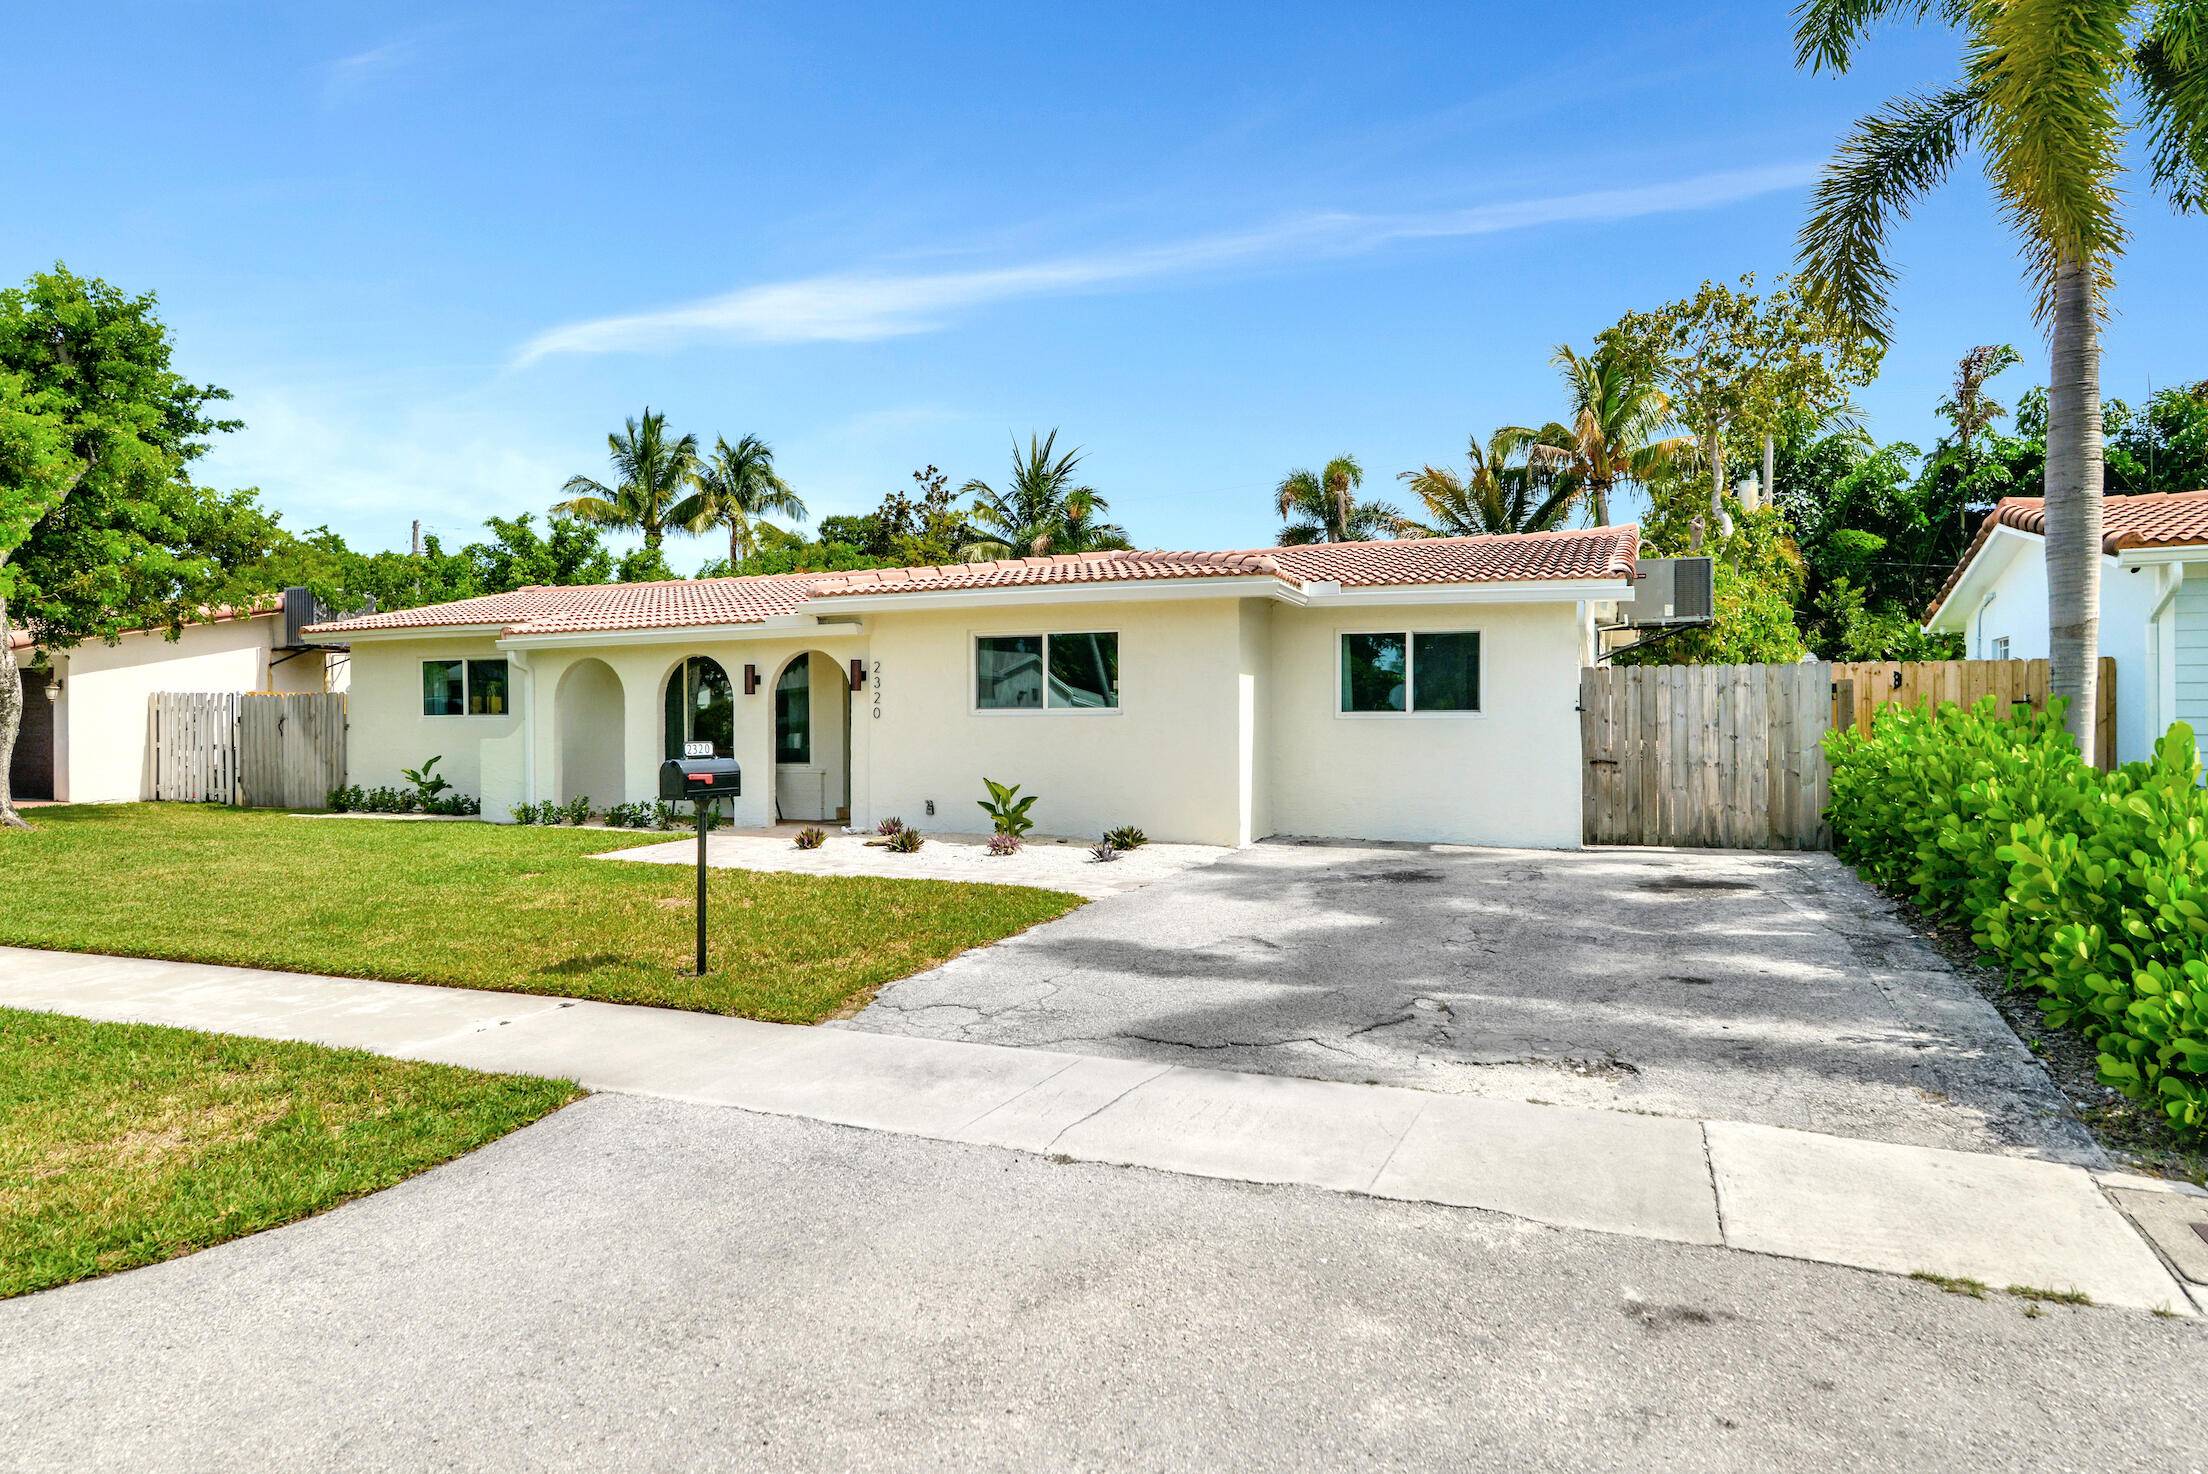 Escape to this beautiful residence nestled in the heart of Lighthouse Point, boasting a large private and fully fenced yard and pool.